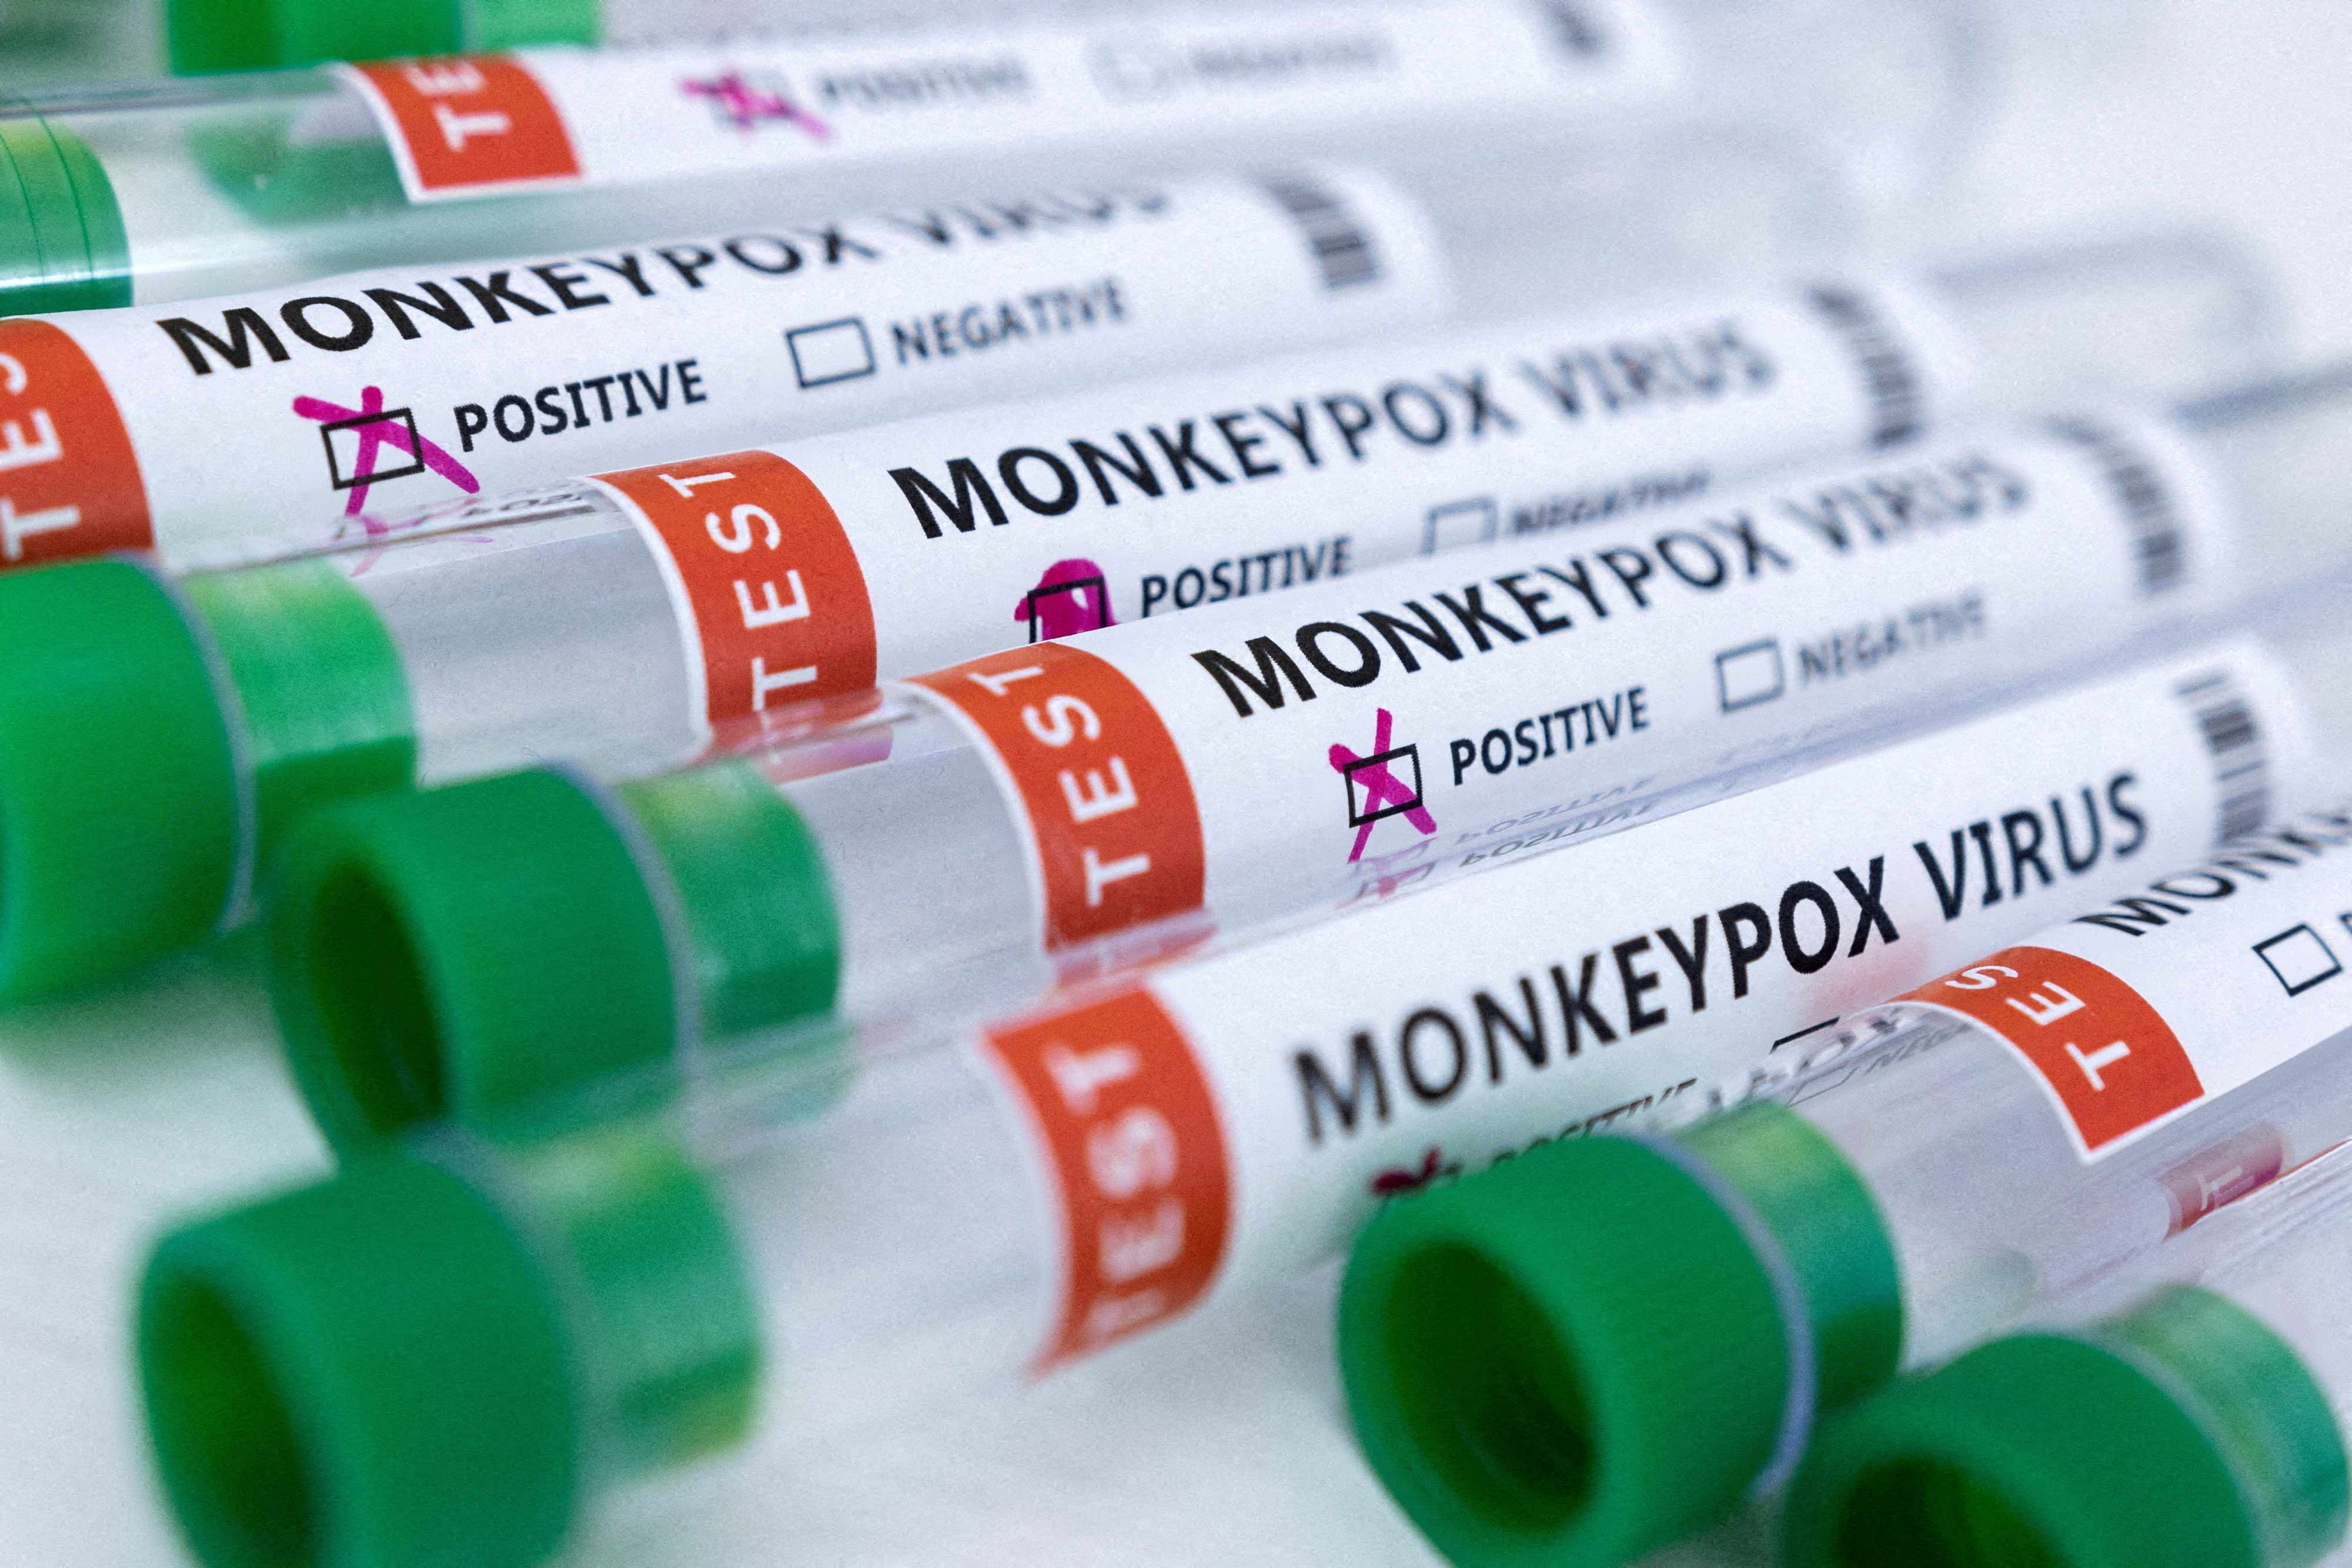 British scientists behind crucial COVID trial pivot to monkeypox treatment research